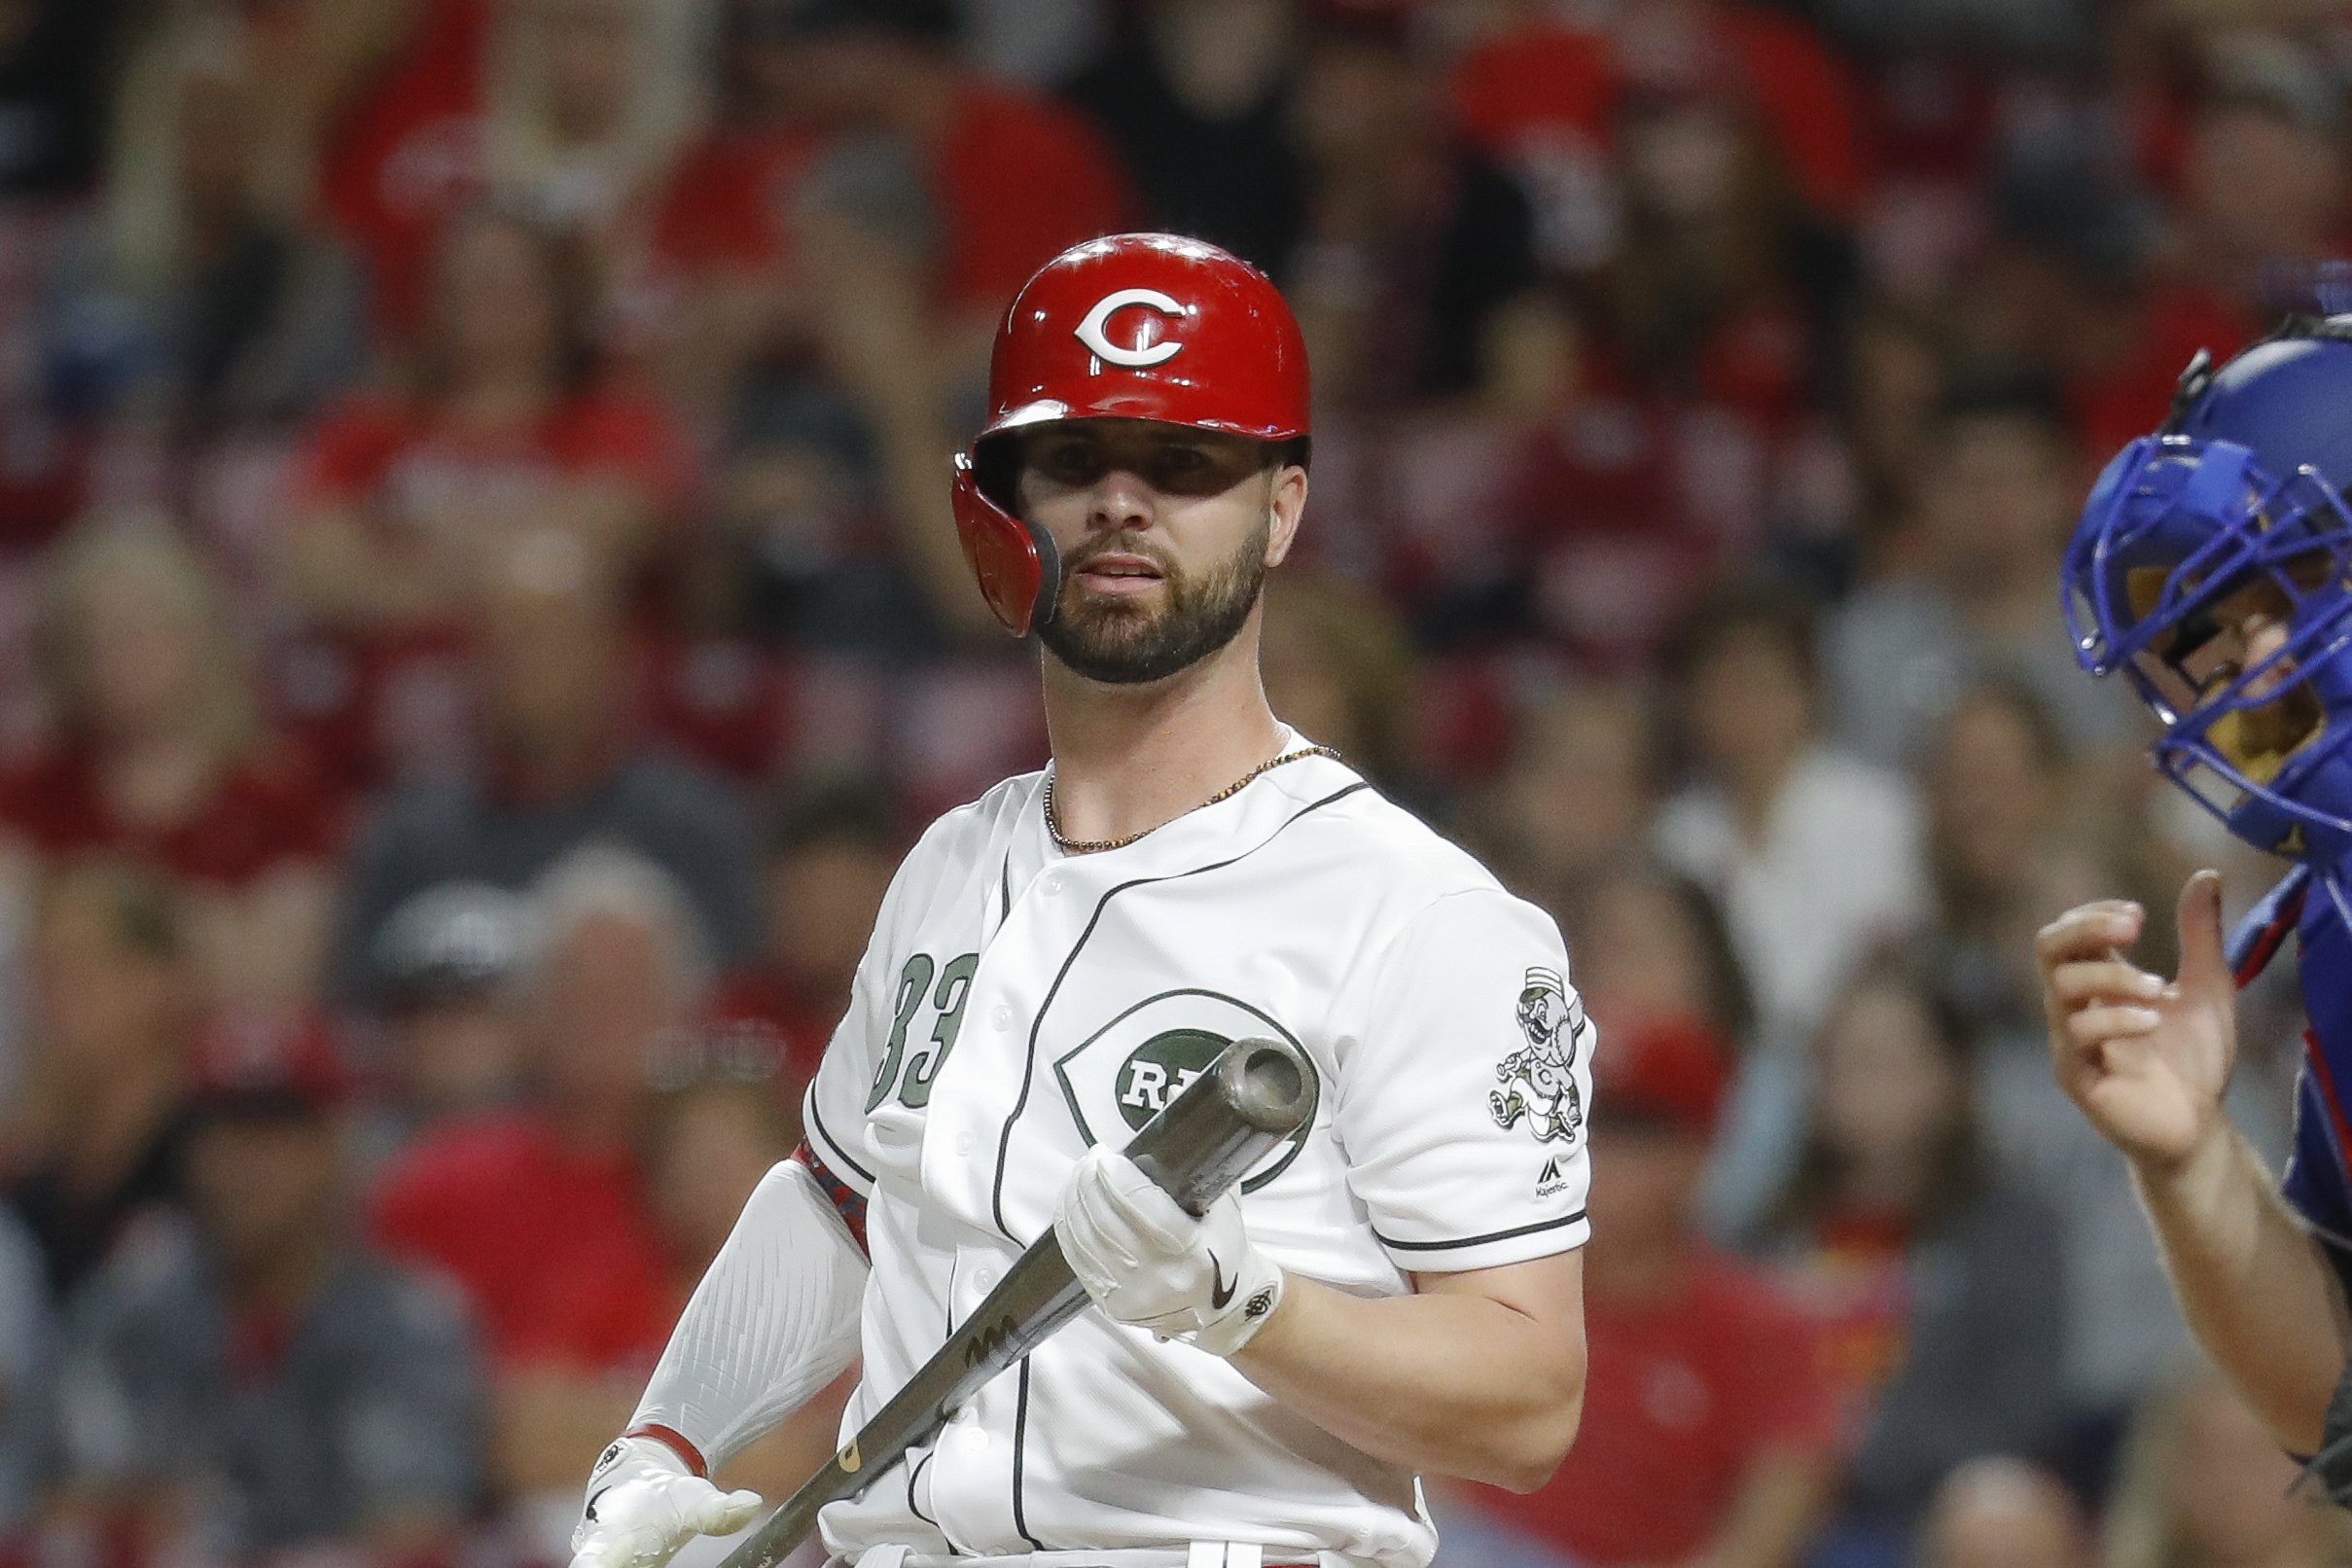 Video: Watch Reds' Jesse Winker Find Out About Yasiel Puig Trade